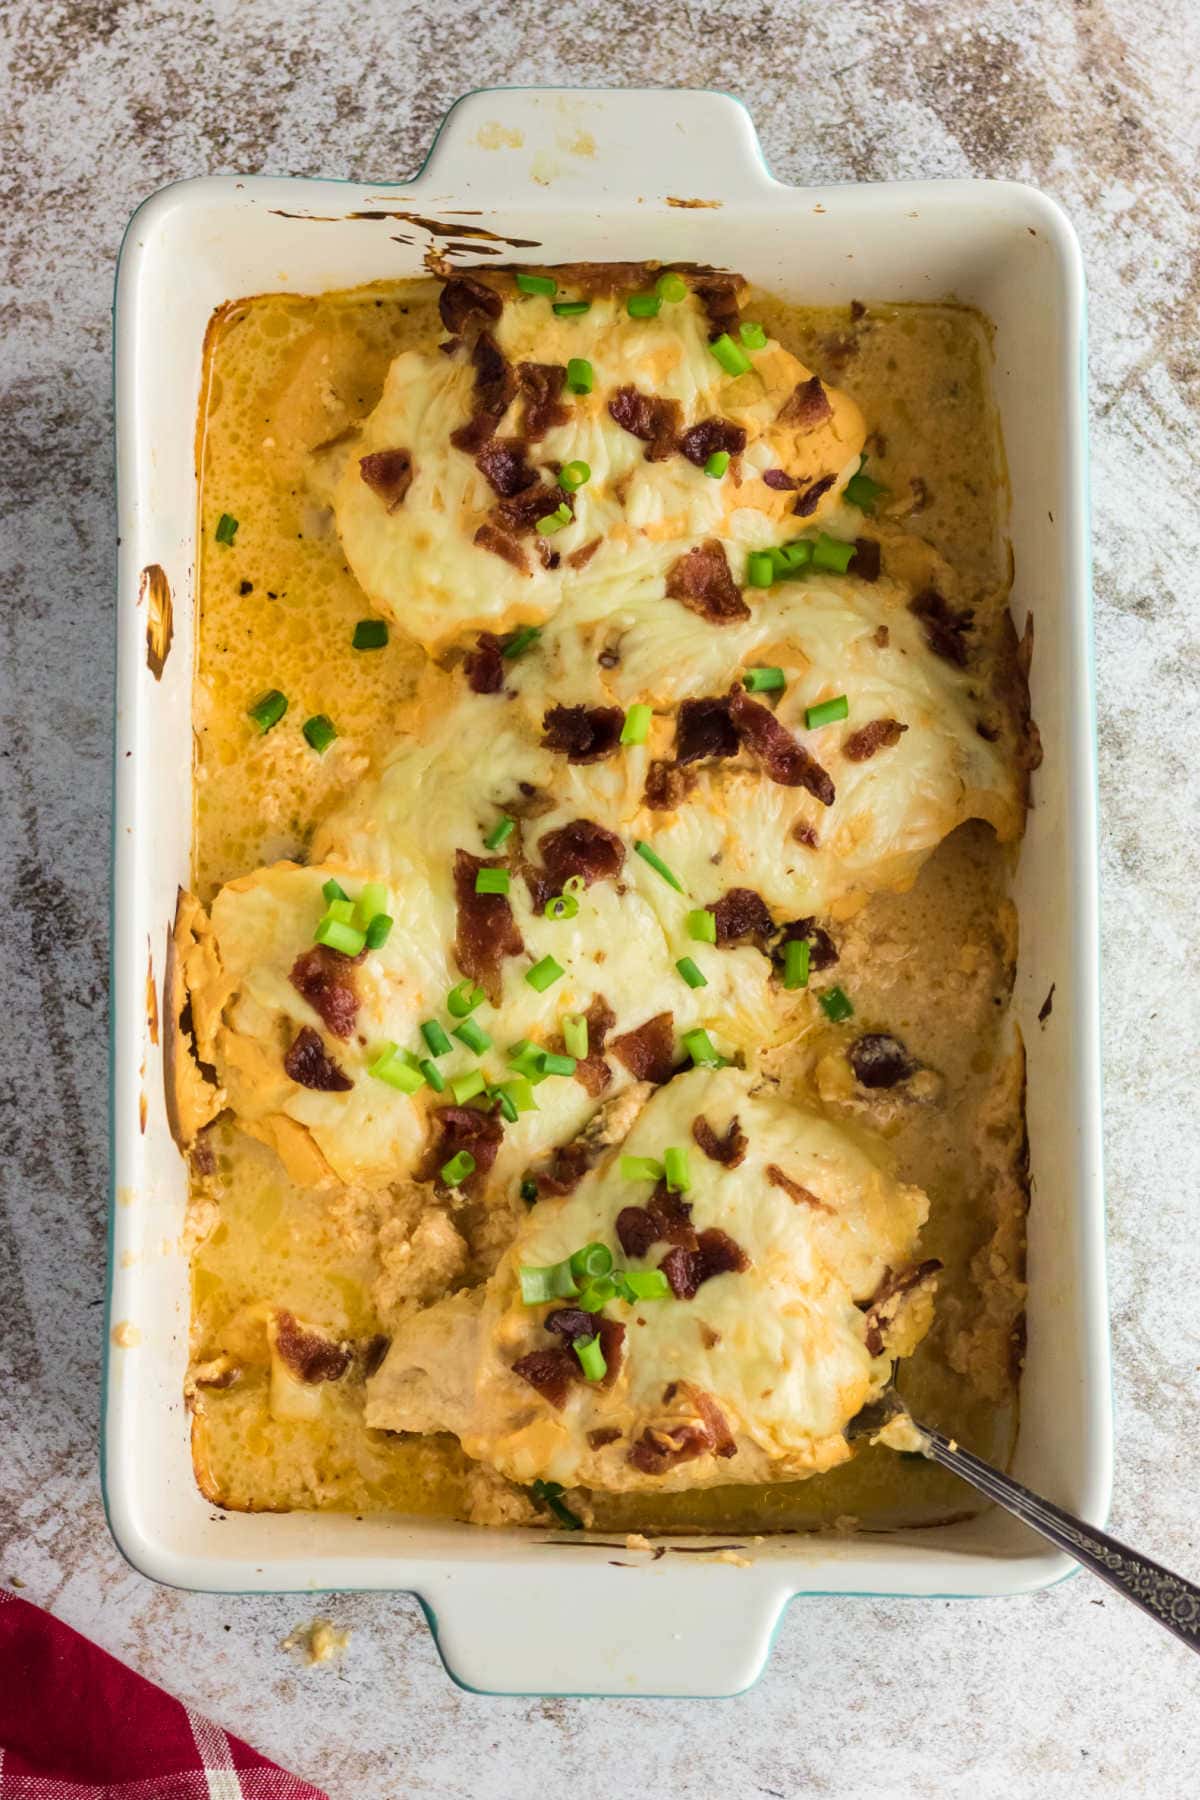 Overhead view of baked chicken breast in a sauce garnished with bacon and green onions.